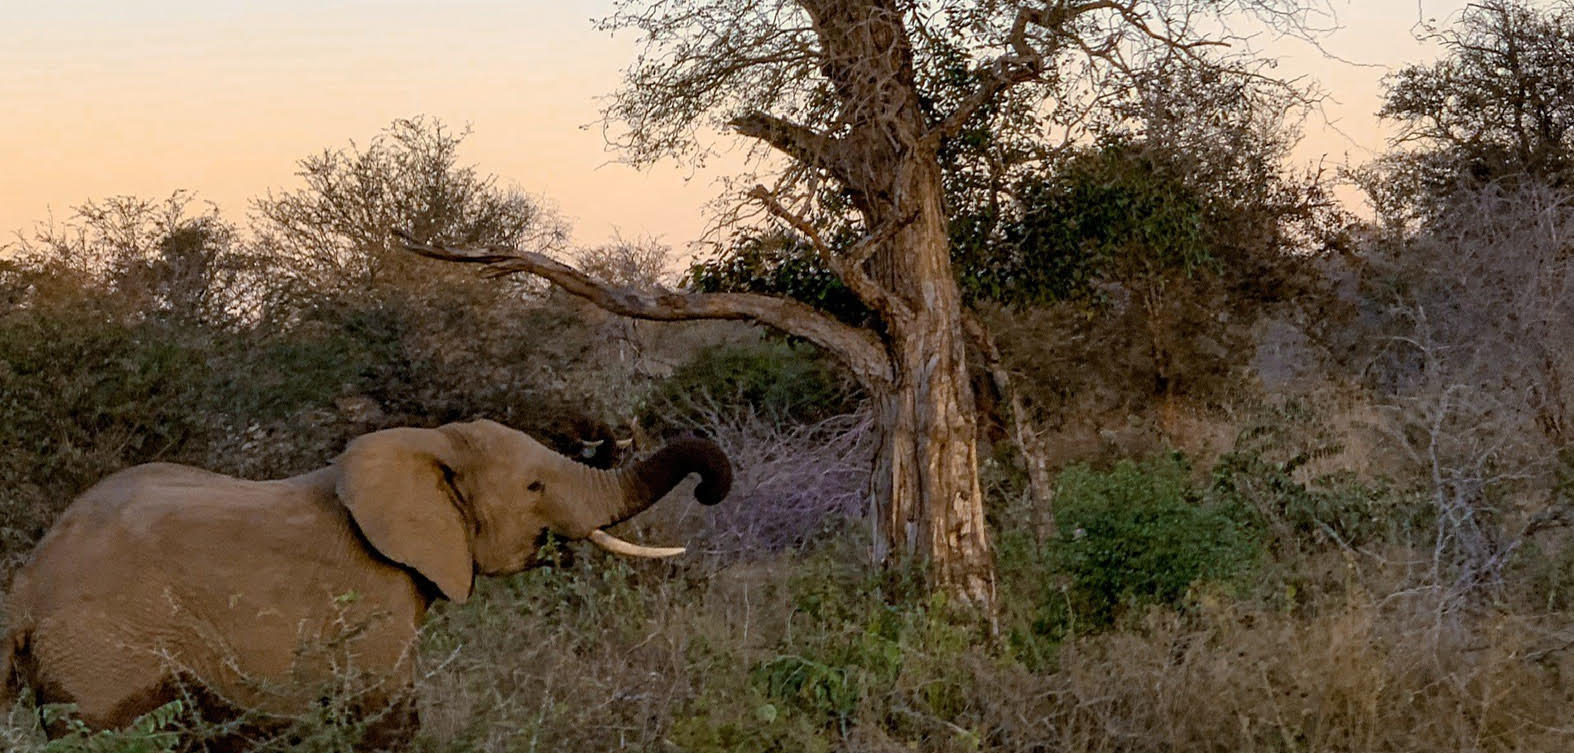 A native elephant in South Africa